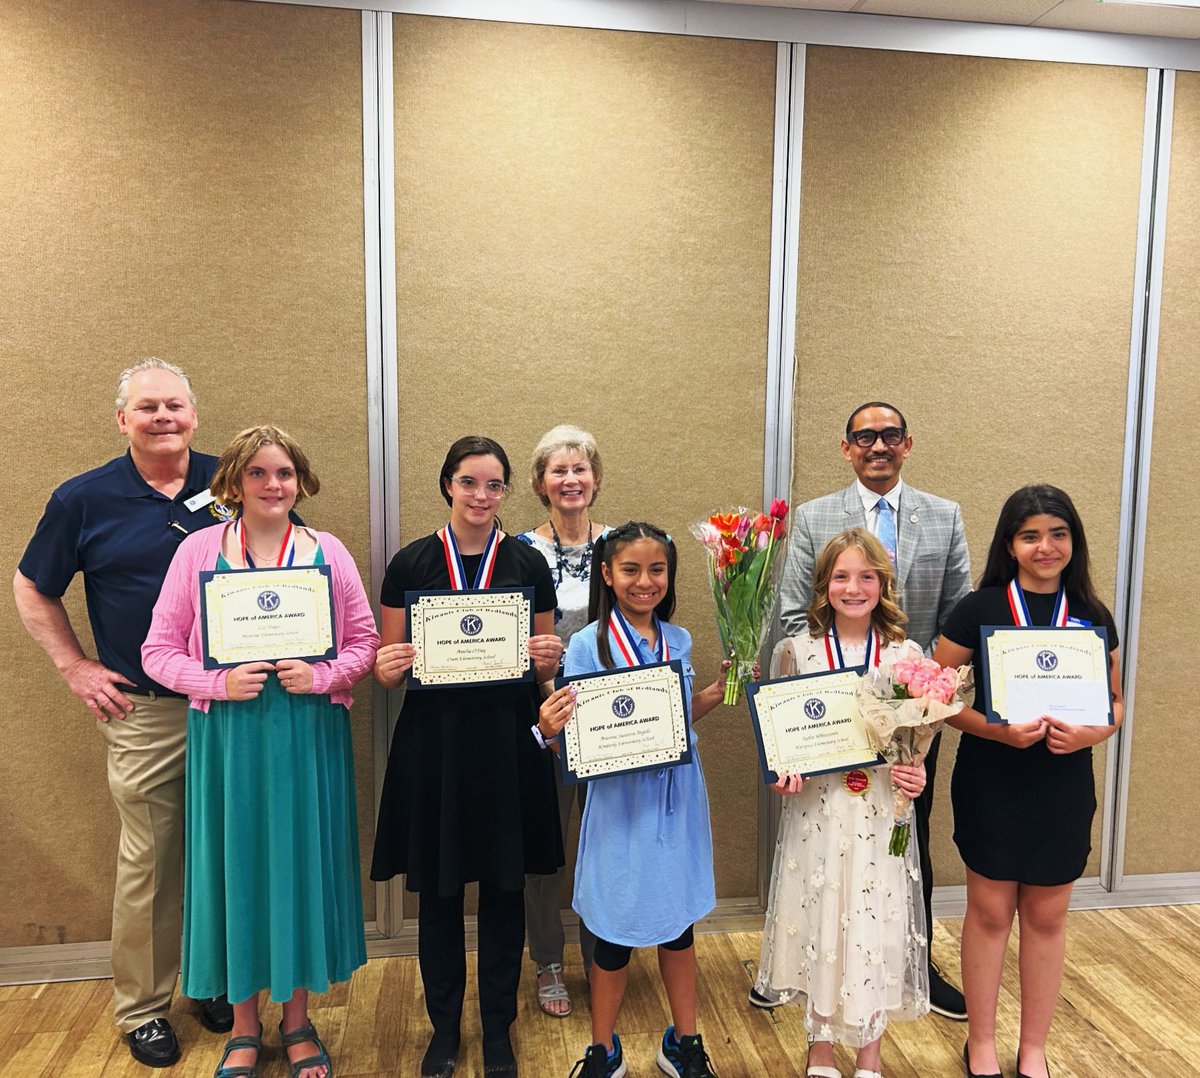 Congrats to our 5th graders from @CramRUSD @KimberlyRUSD @MariposaRUSD @McKinleyRUSD @mentoneRUSD who received the Hope of America Award this afternoon for their exemplary academics and citizenship. Thank you Kiwanis Club of Redlands! @RedlandsUSD #ThisIsRUSD